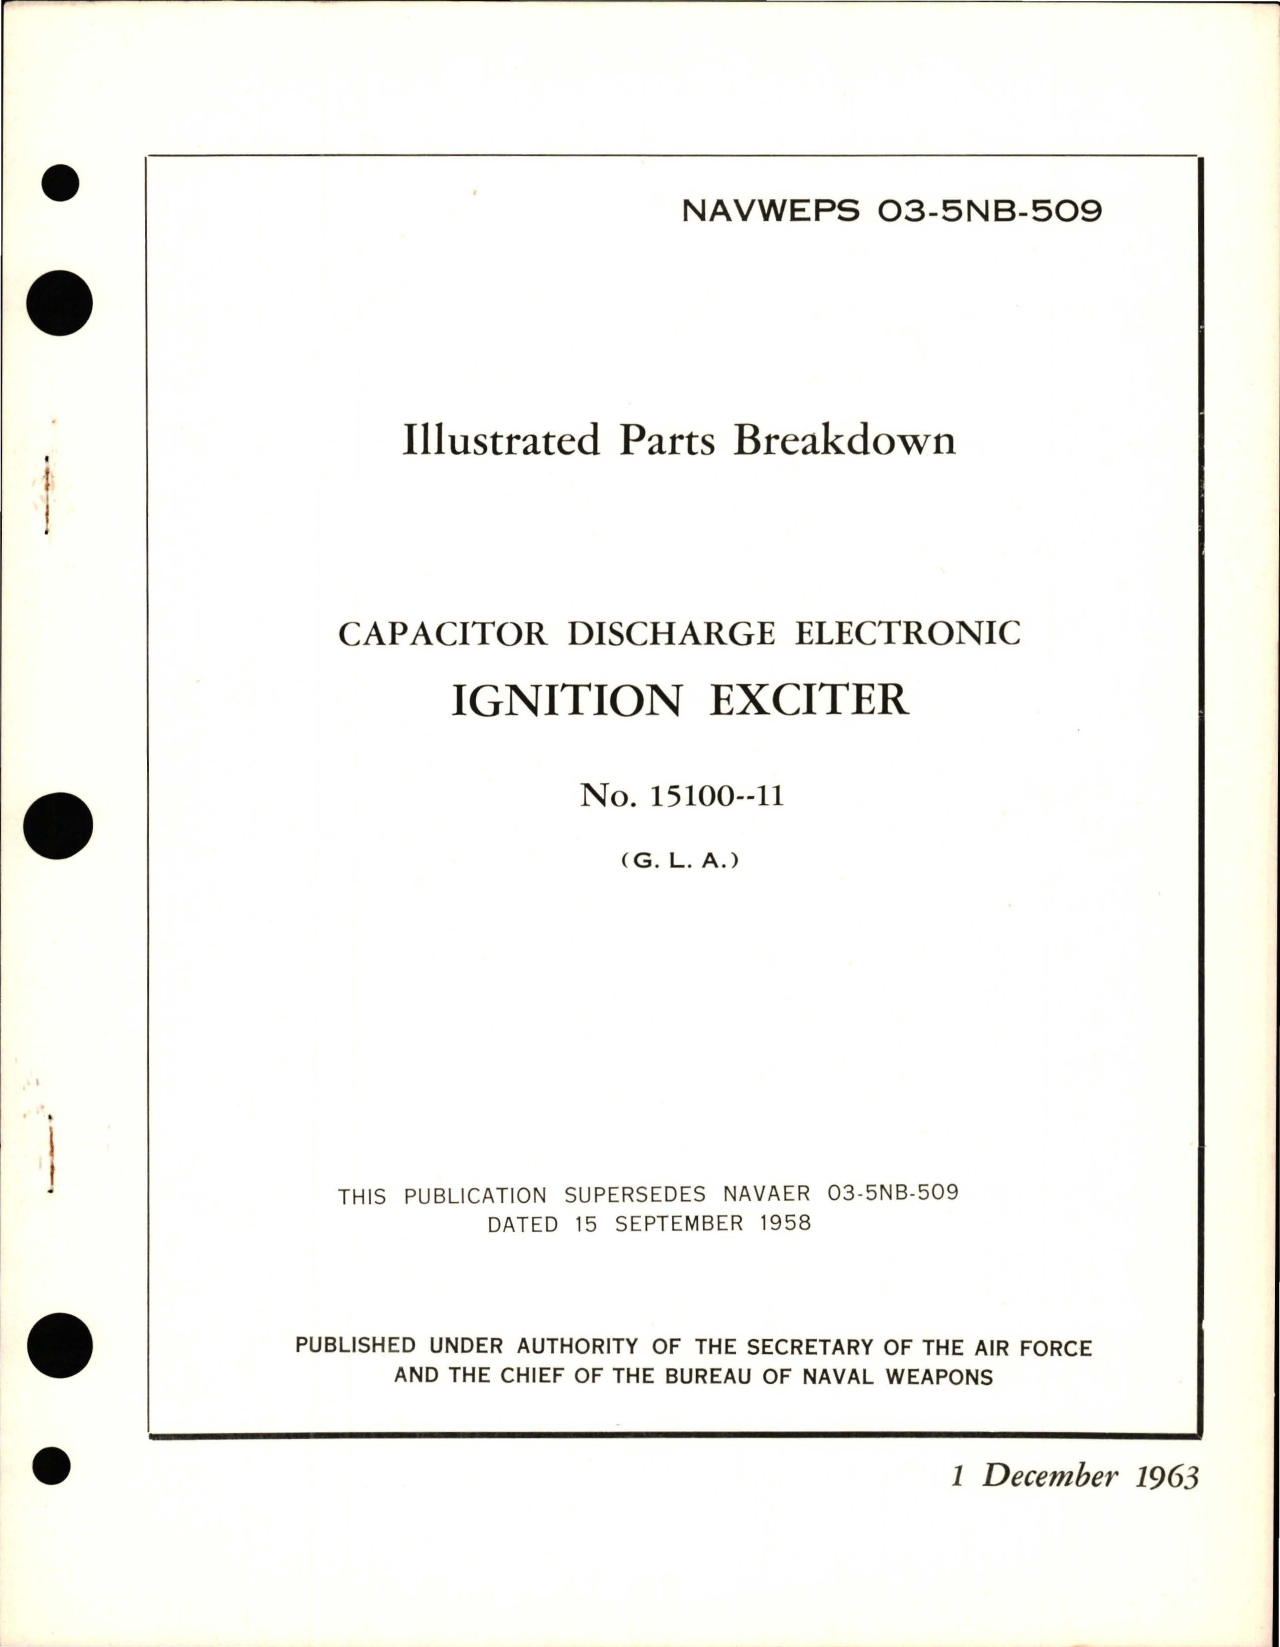 Sample page 1 from AirCorps Library document: Illustrated Parts Breakdown for Capacitor Discharge Electronic Ignition Exciter - No 15100-11